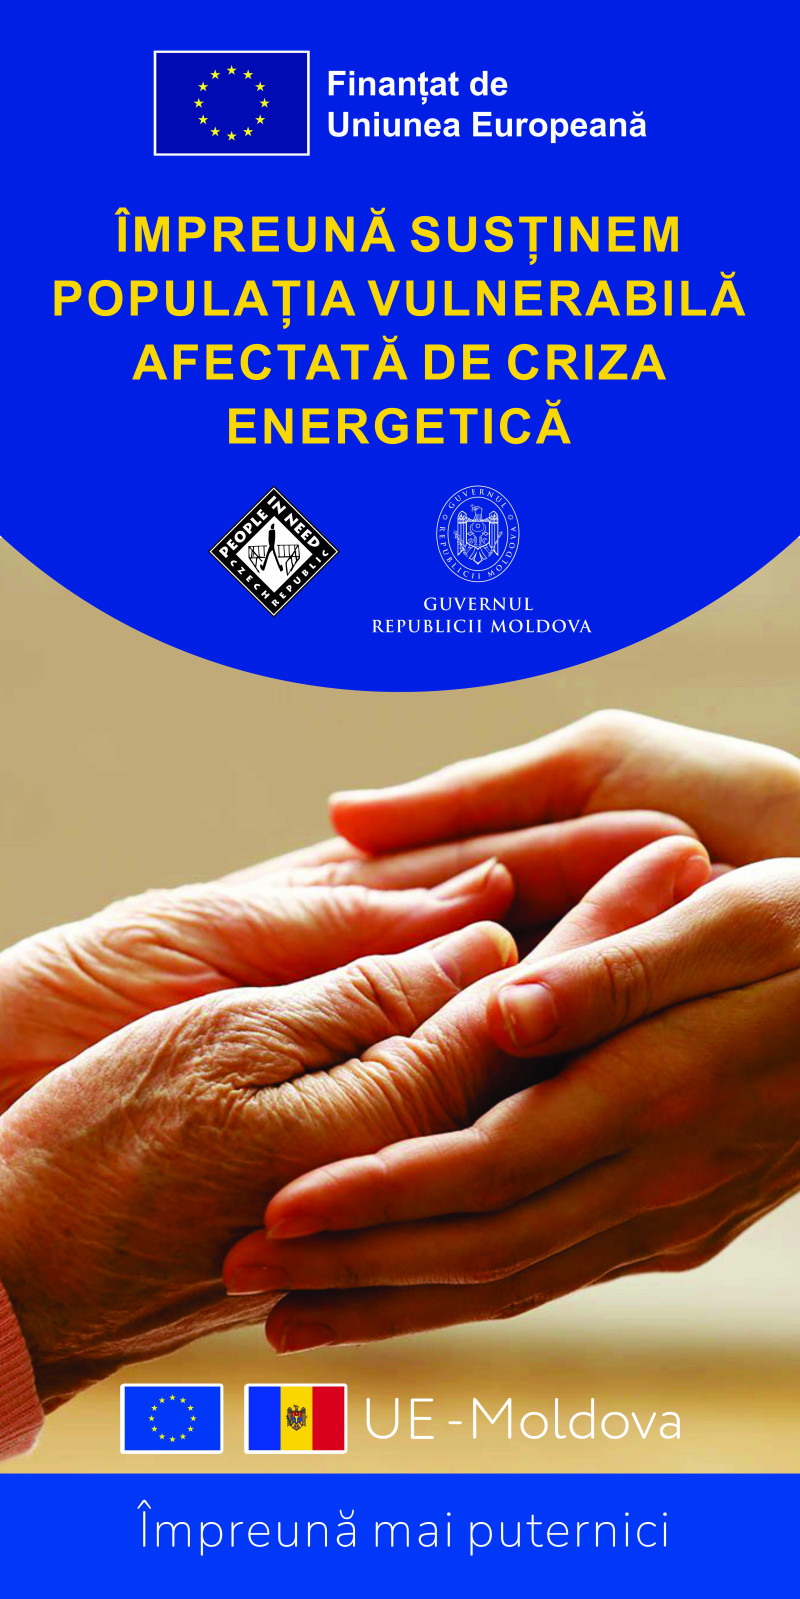 Supporting together the vulnerable population affected by the energy crisis